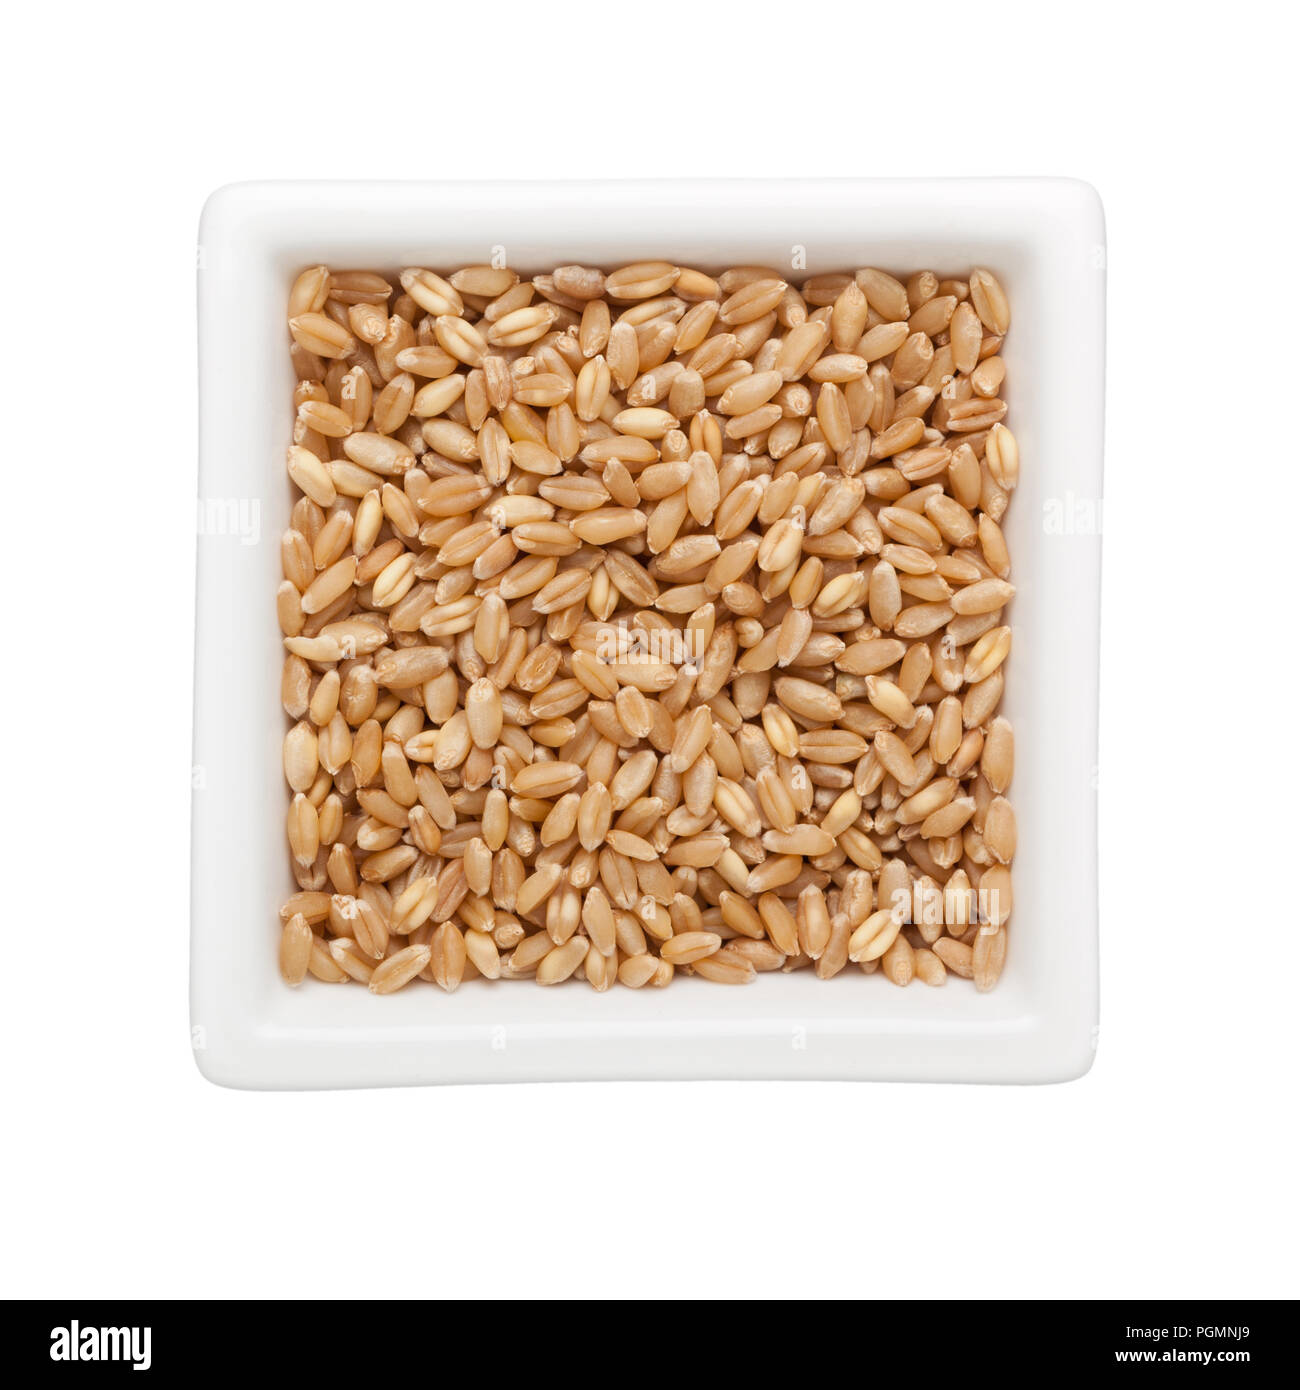 Wheat grain in a square bowl isolated on white background Stock Photo